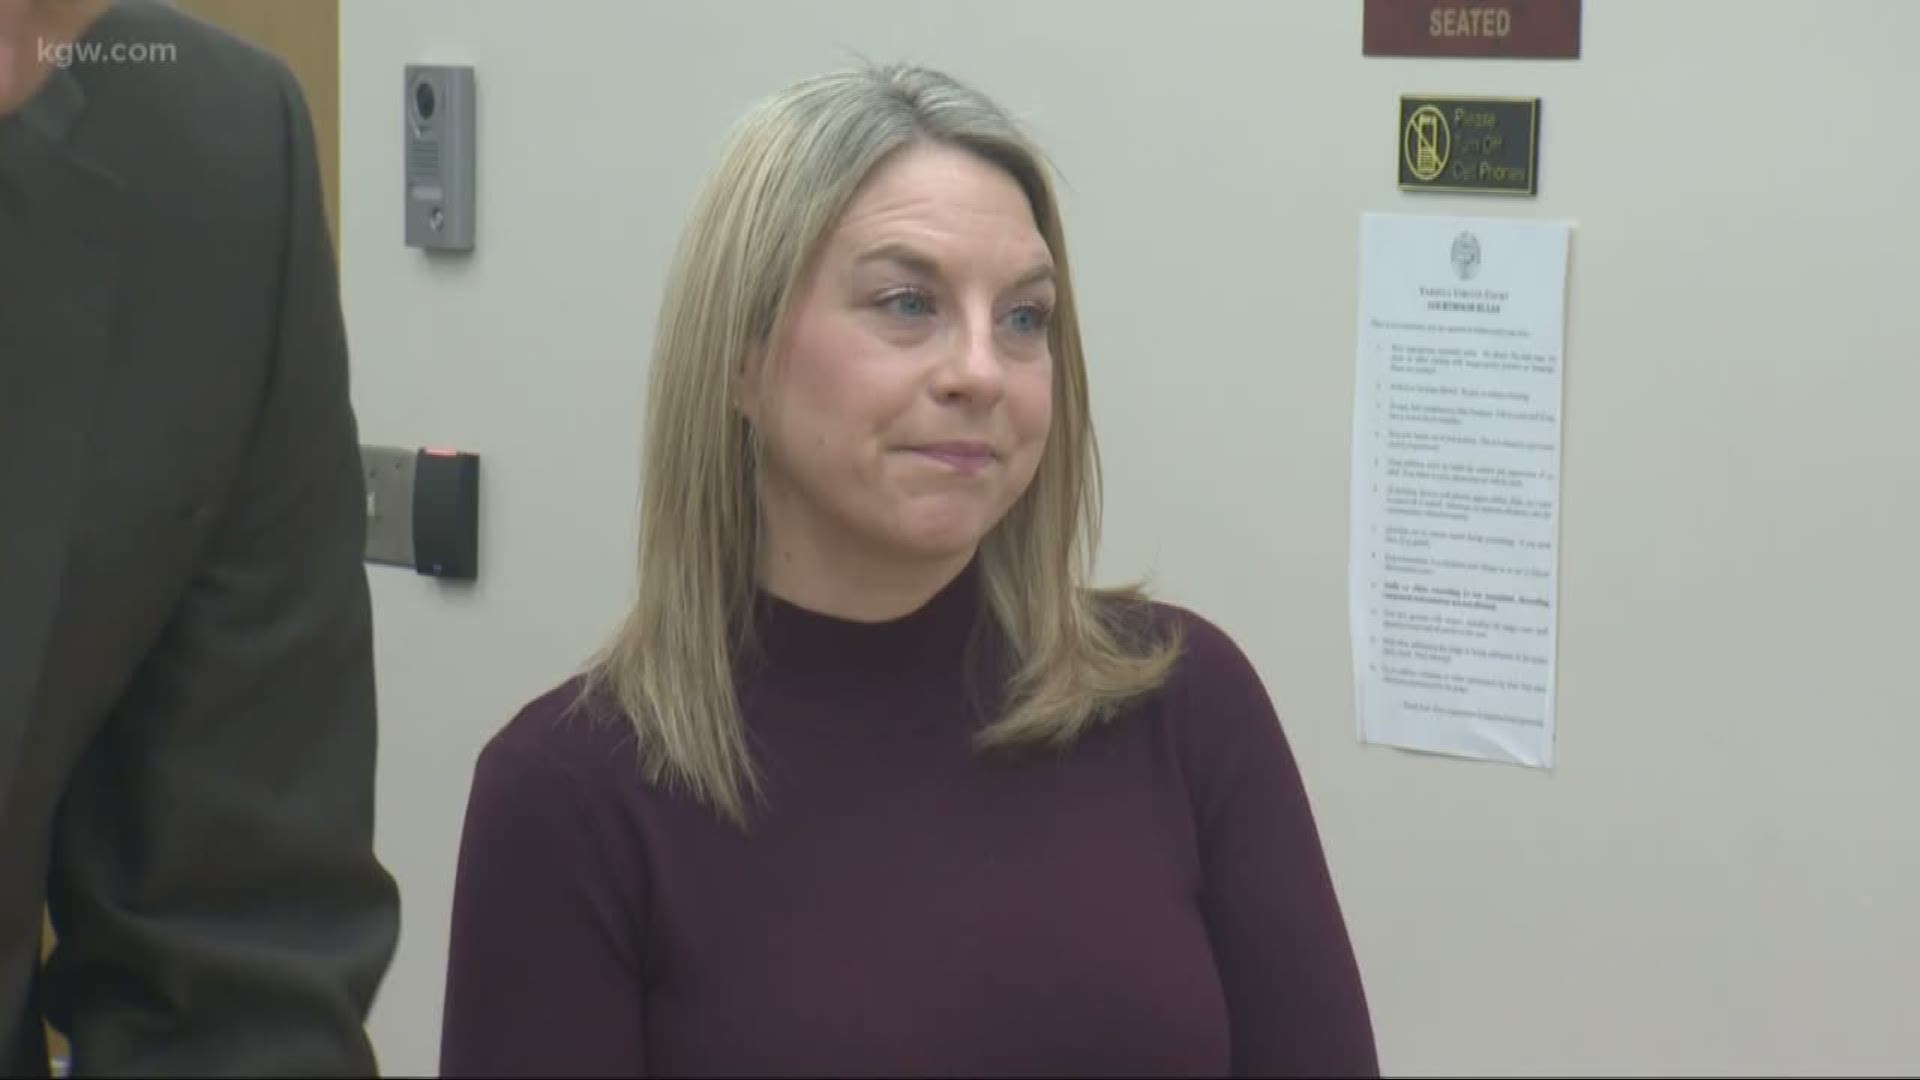 Jennifer Weather has made a plea deal where she will admit to DUII and a count of reckless endangerment will be dropped. She admits she was drunk the night her daughter Meaghan Cordie fell out of a car and died.